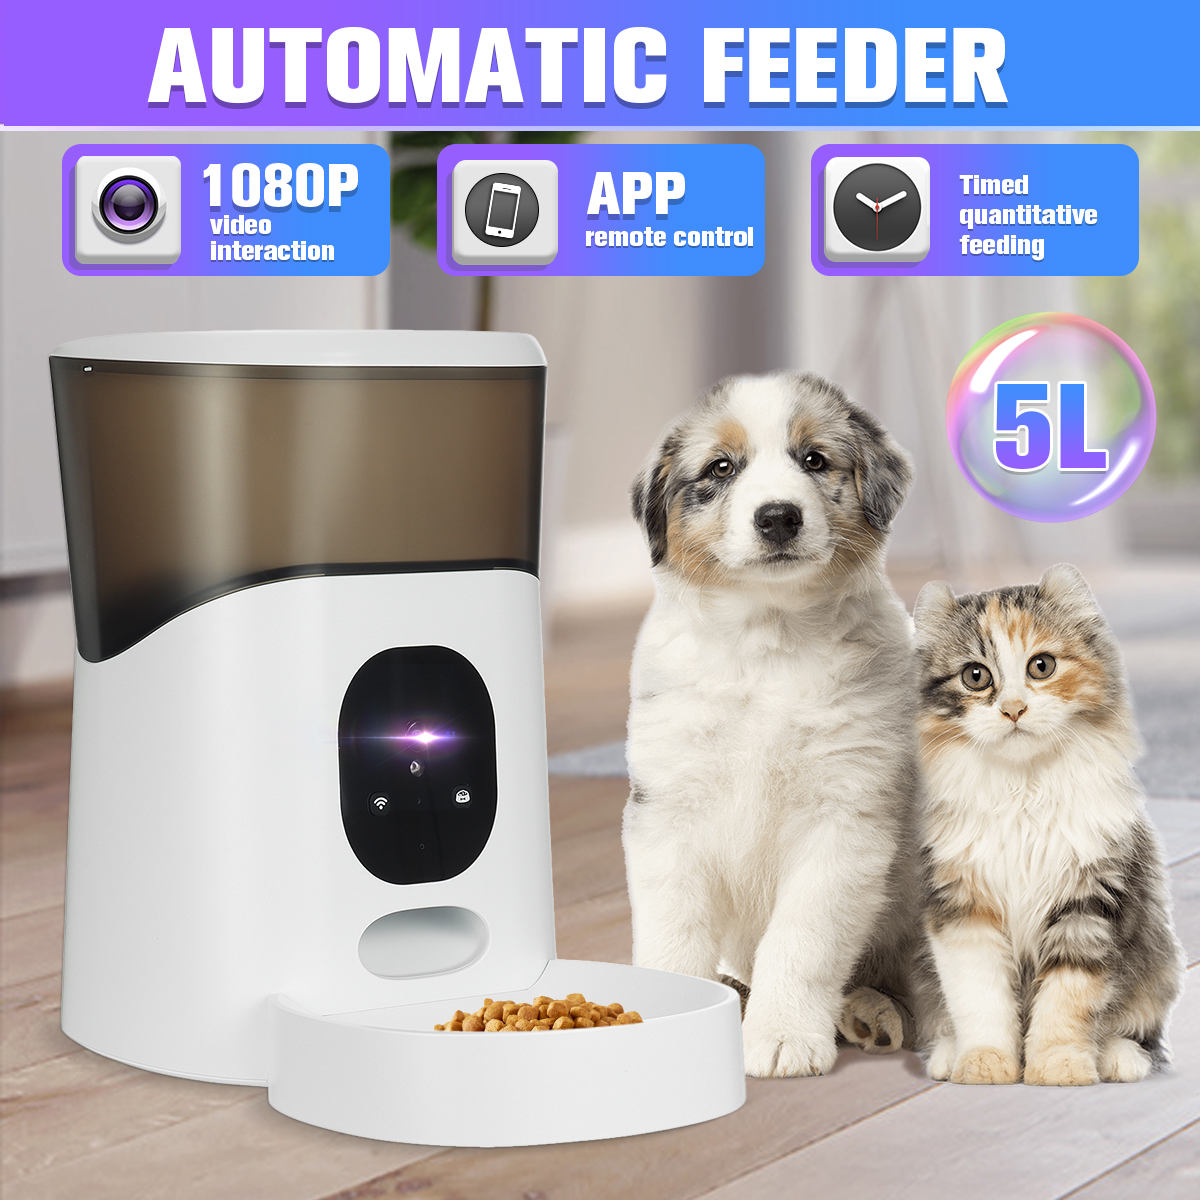 5L-Automatic-Pet-Feeder-Timing-Recording-Voice-APP-control-Intelligent-Dog-Feeding-Cat-Bowls-Puppy-S-1957123-1